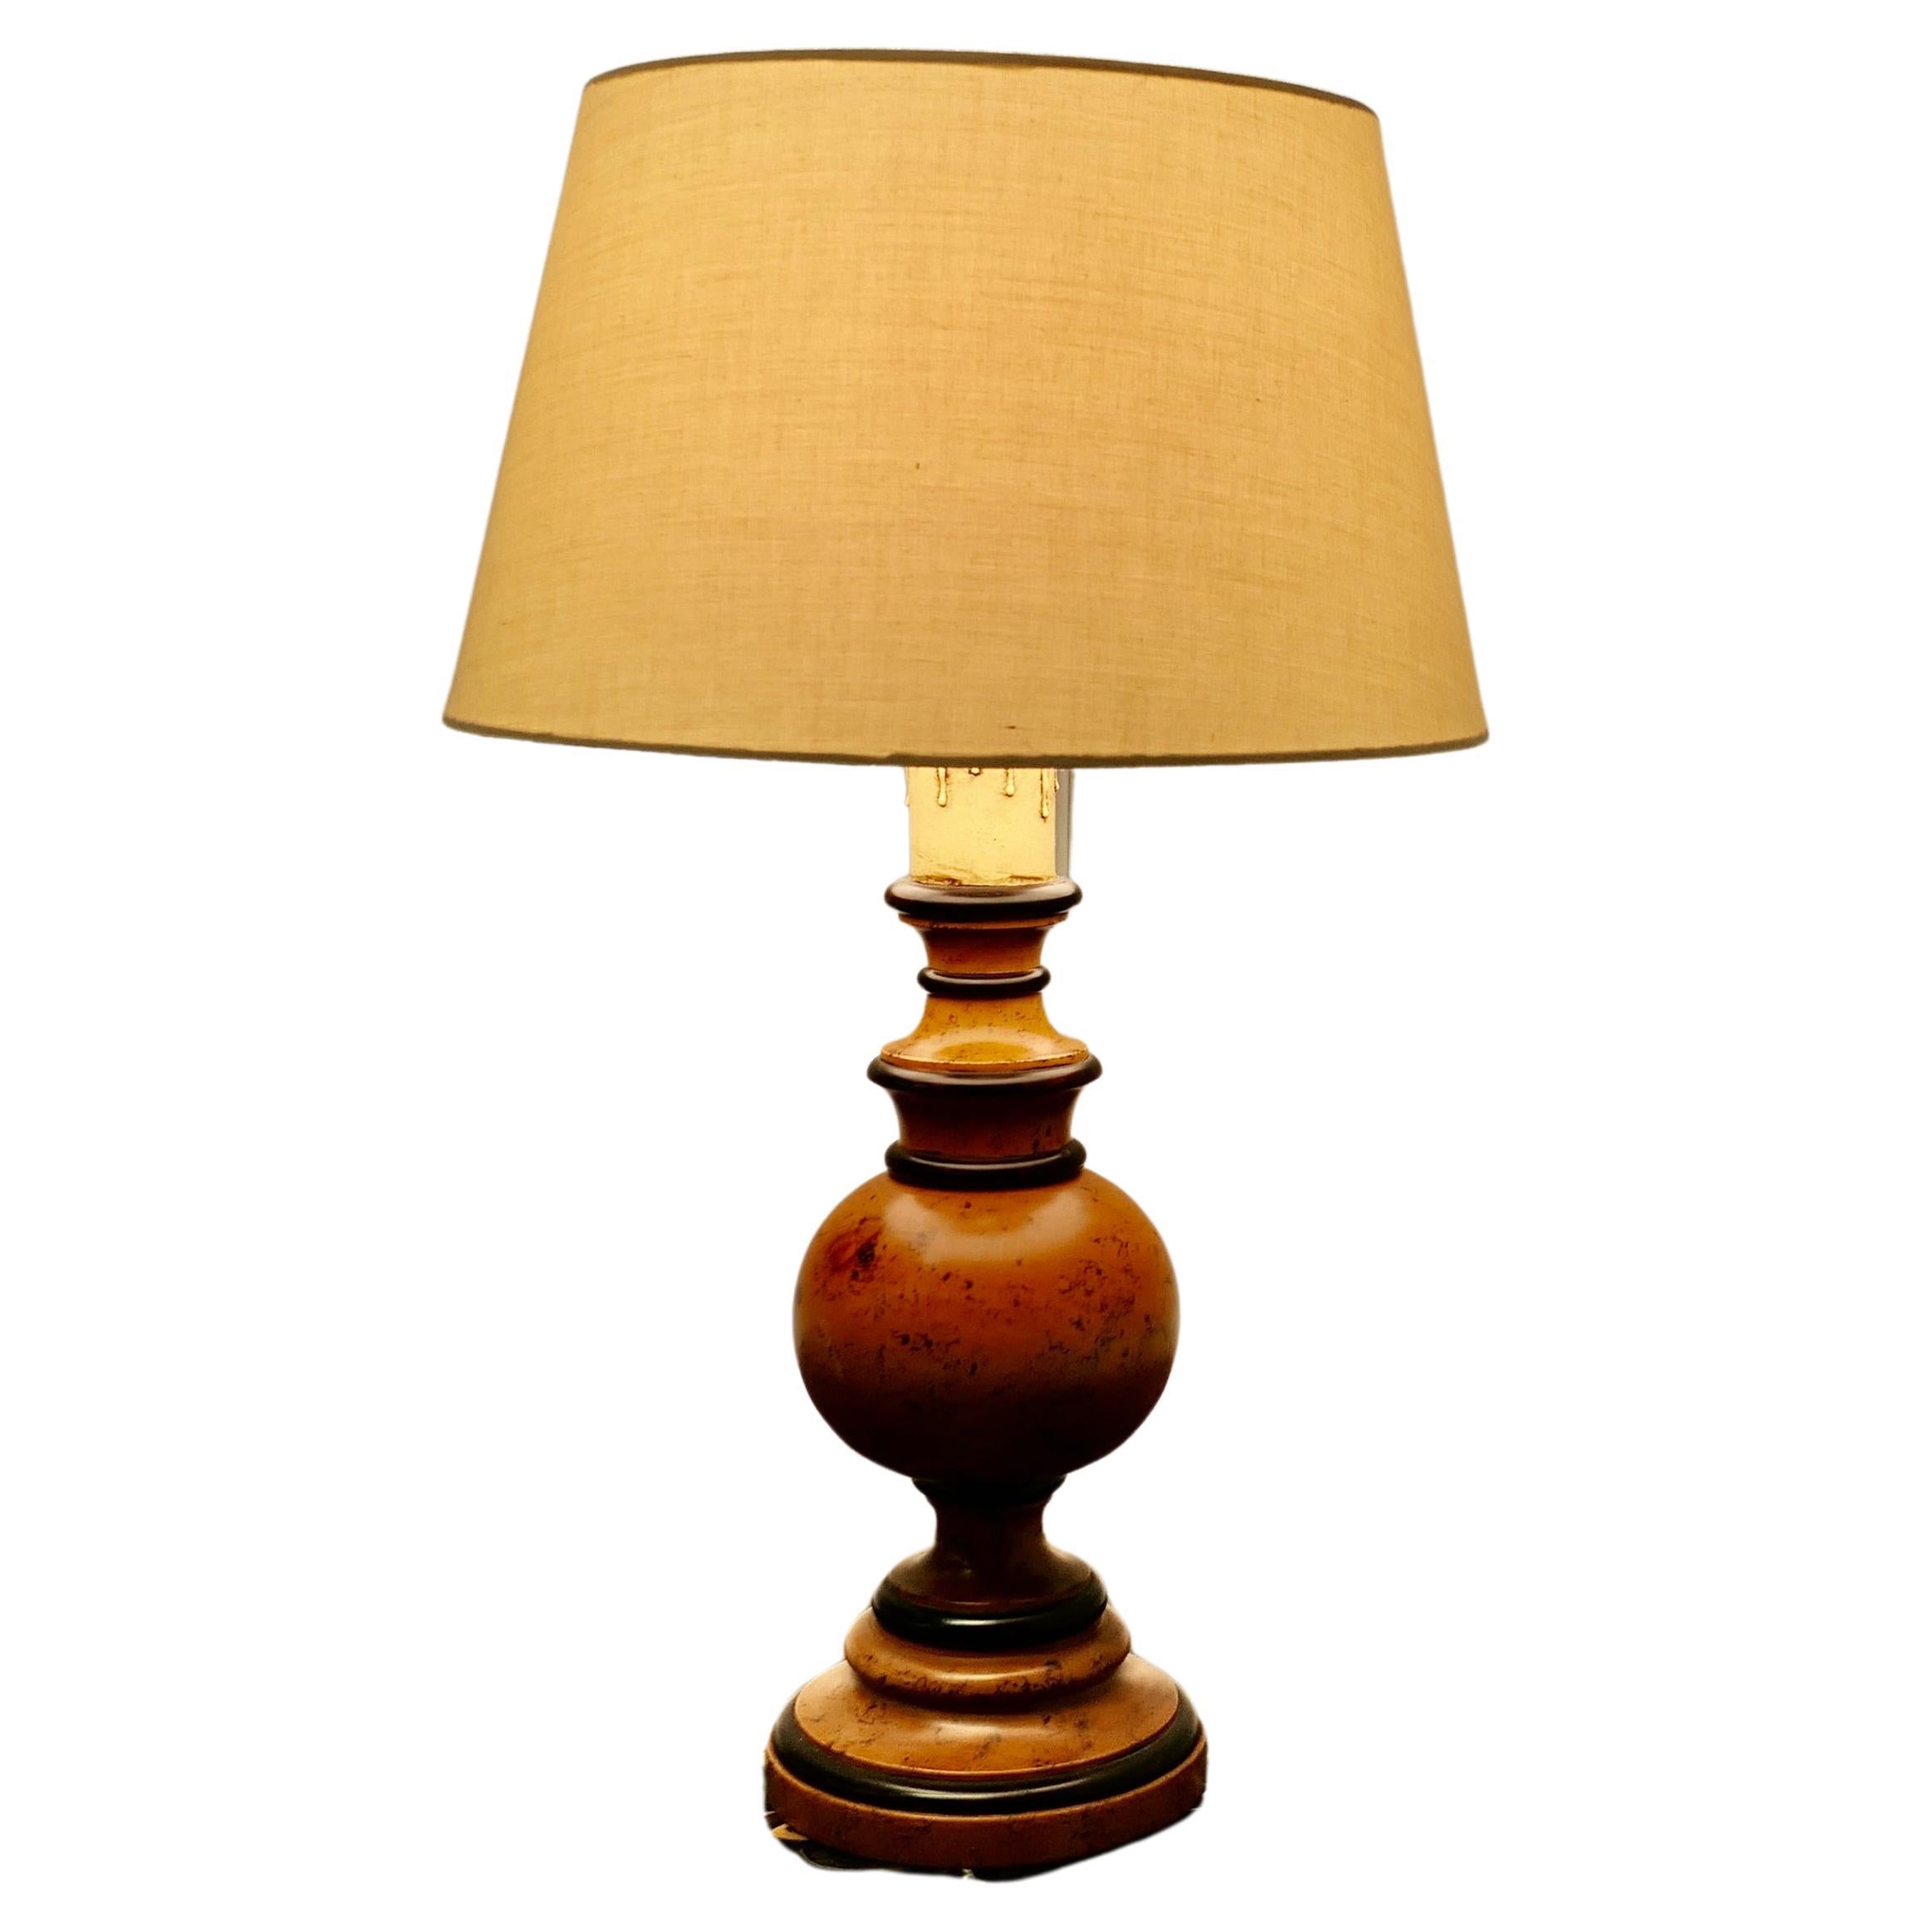 Large Bulbous Turned Wood Table Lamp